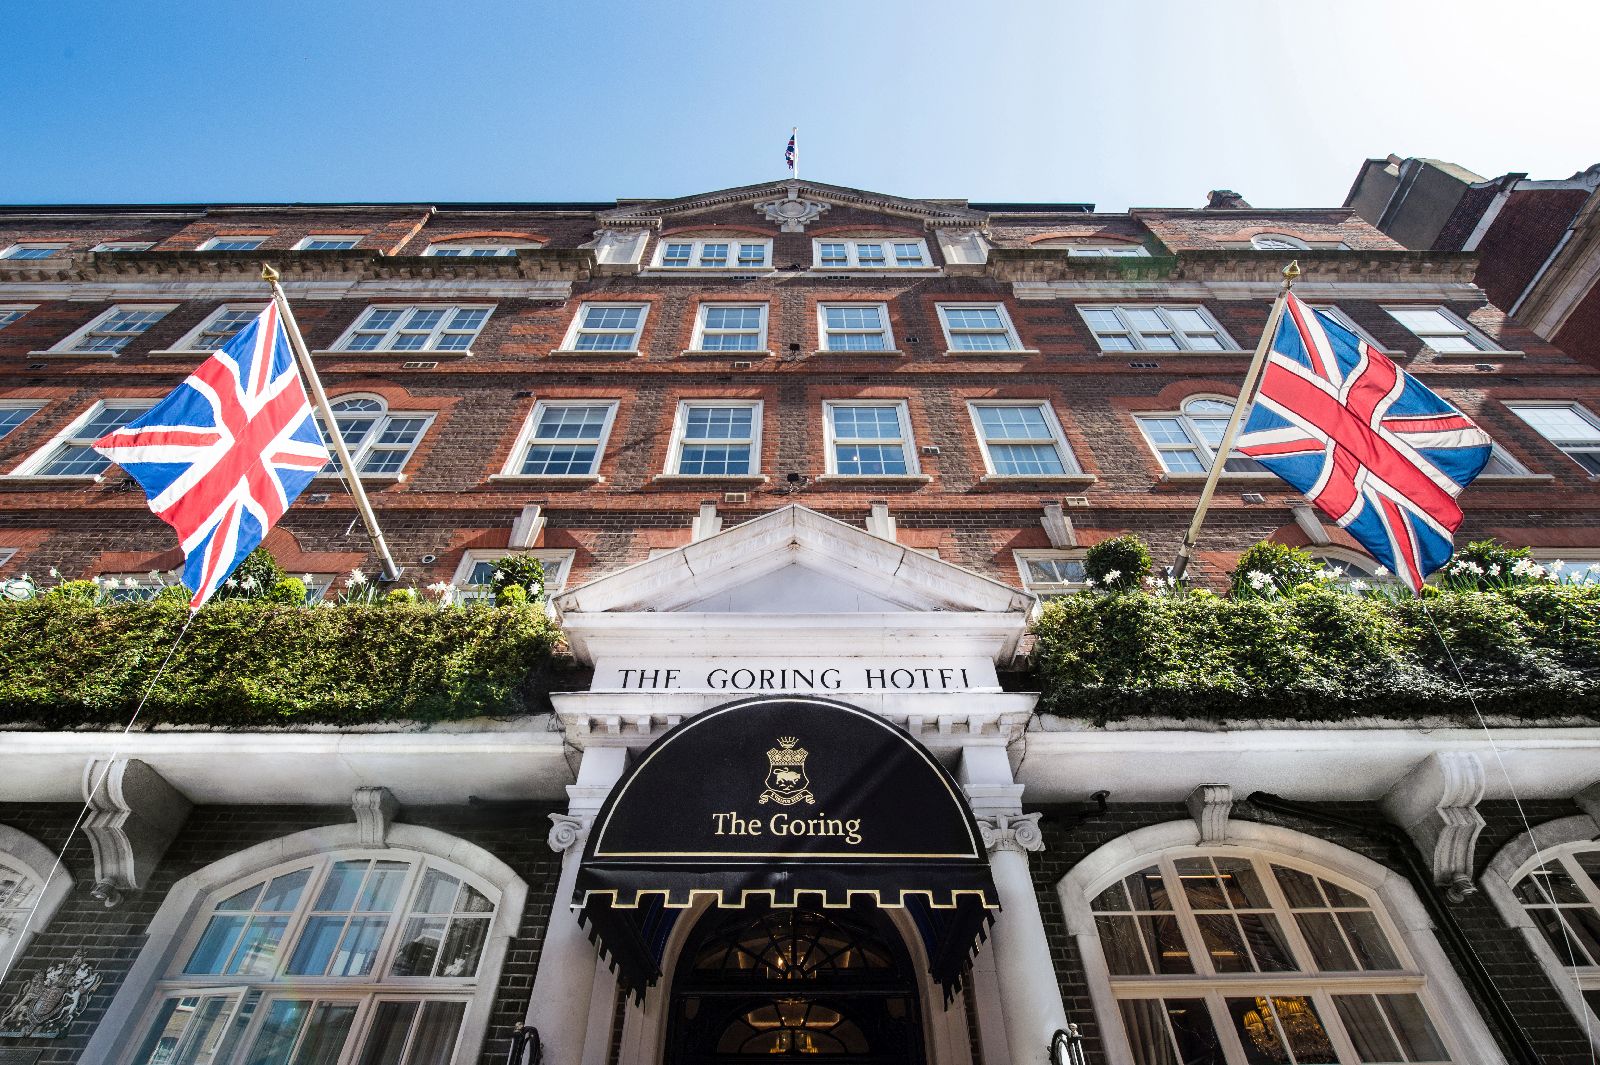 Exterior of The Goring hotel in London England